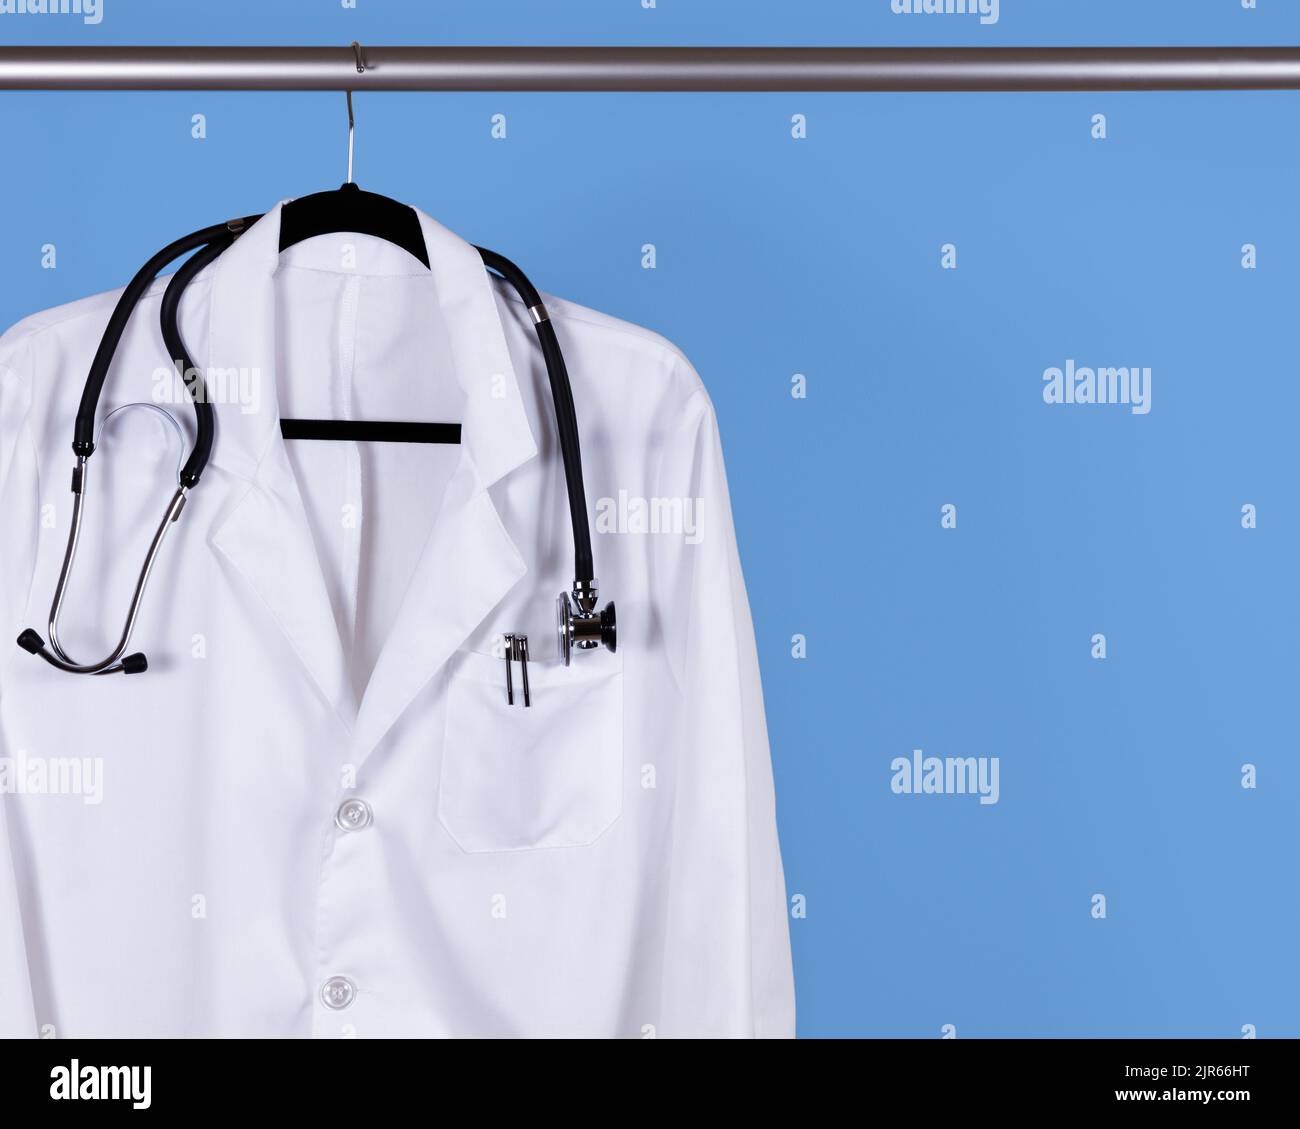 White scrub shirt for medical professional hanging on blue wall Stock Photo